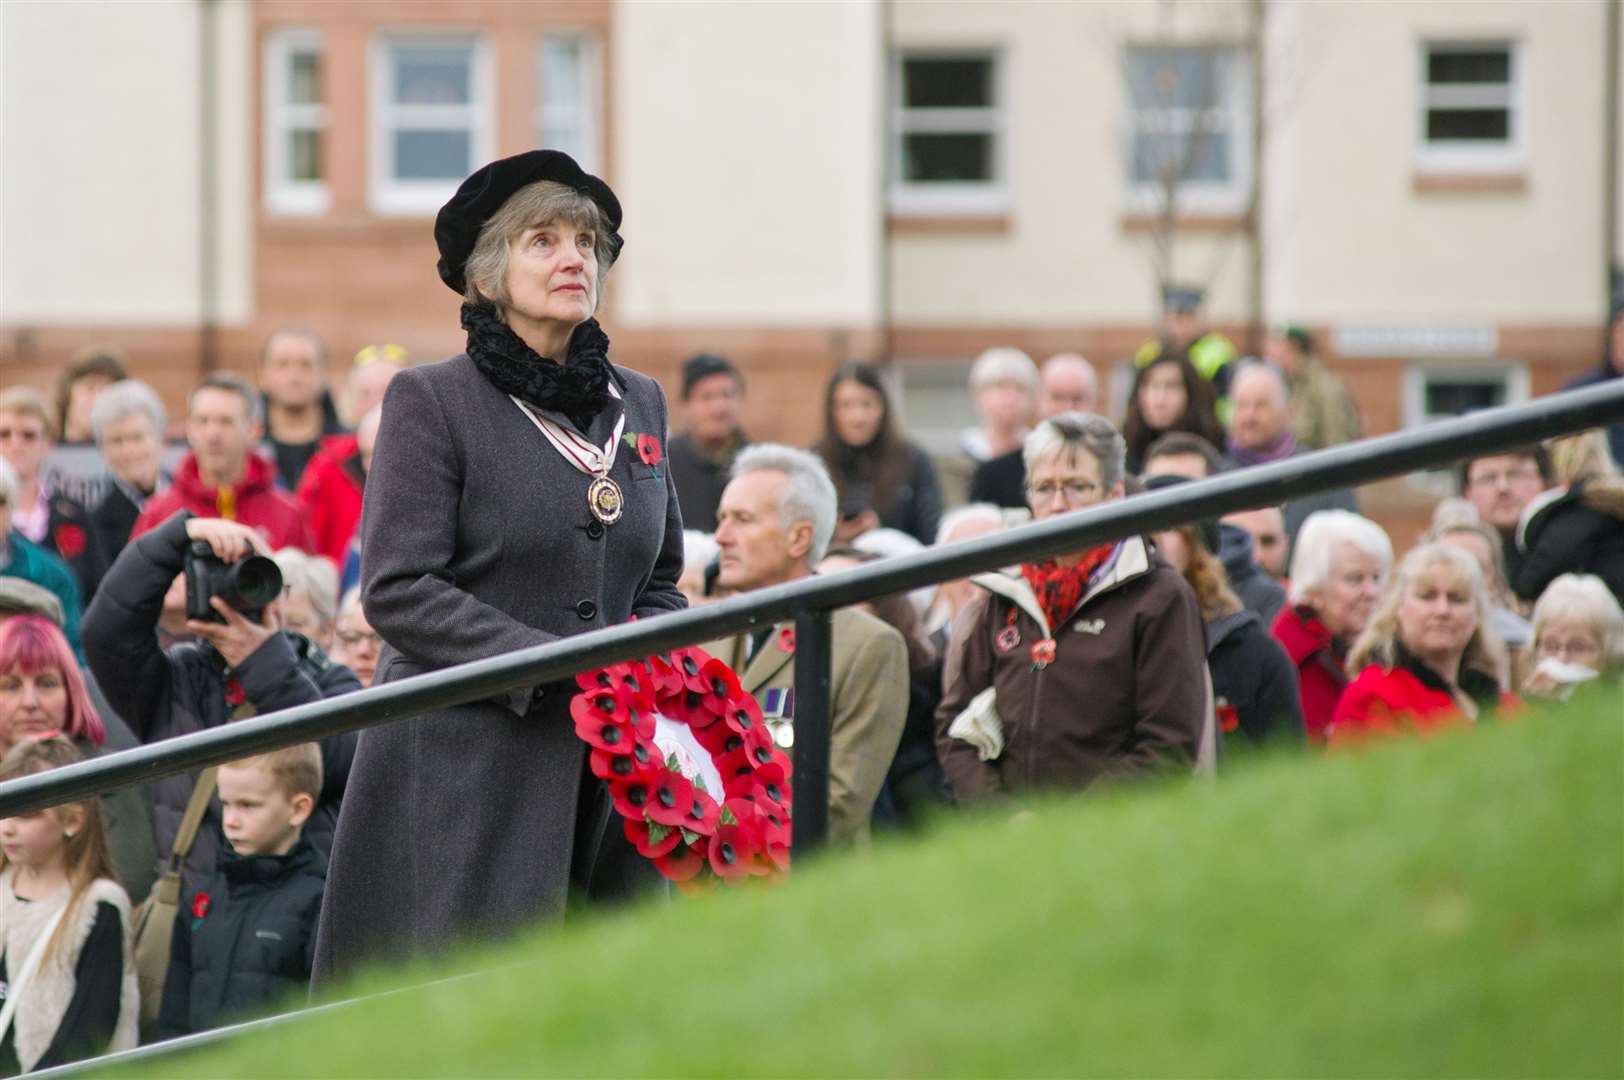 Joanna Grant Peterkin, Deputy Lord Lieutenant, as she lays a wreath at Forres...2018 Forres Remembrance Sunday parade and wreath laying. ..Picture: Daniel Forsyth. Image No.042559.